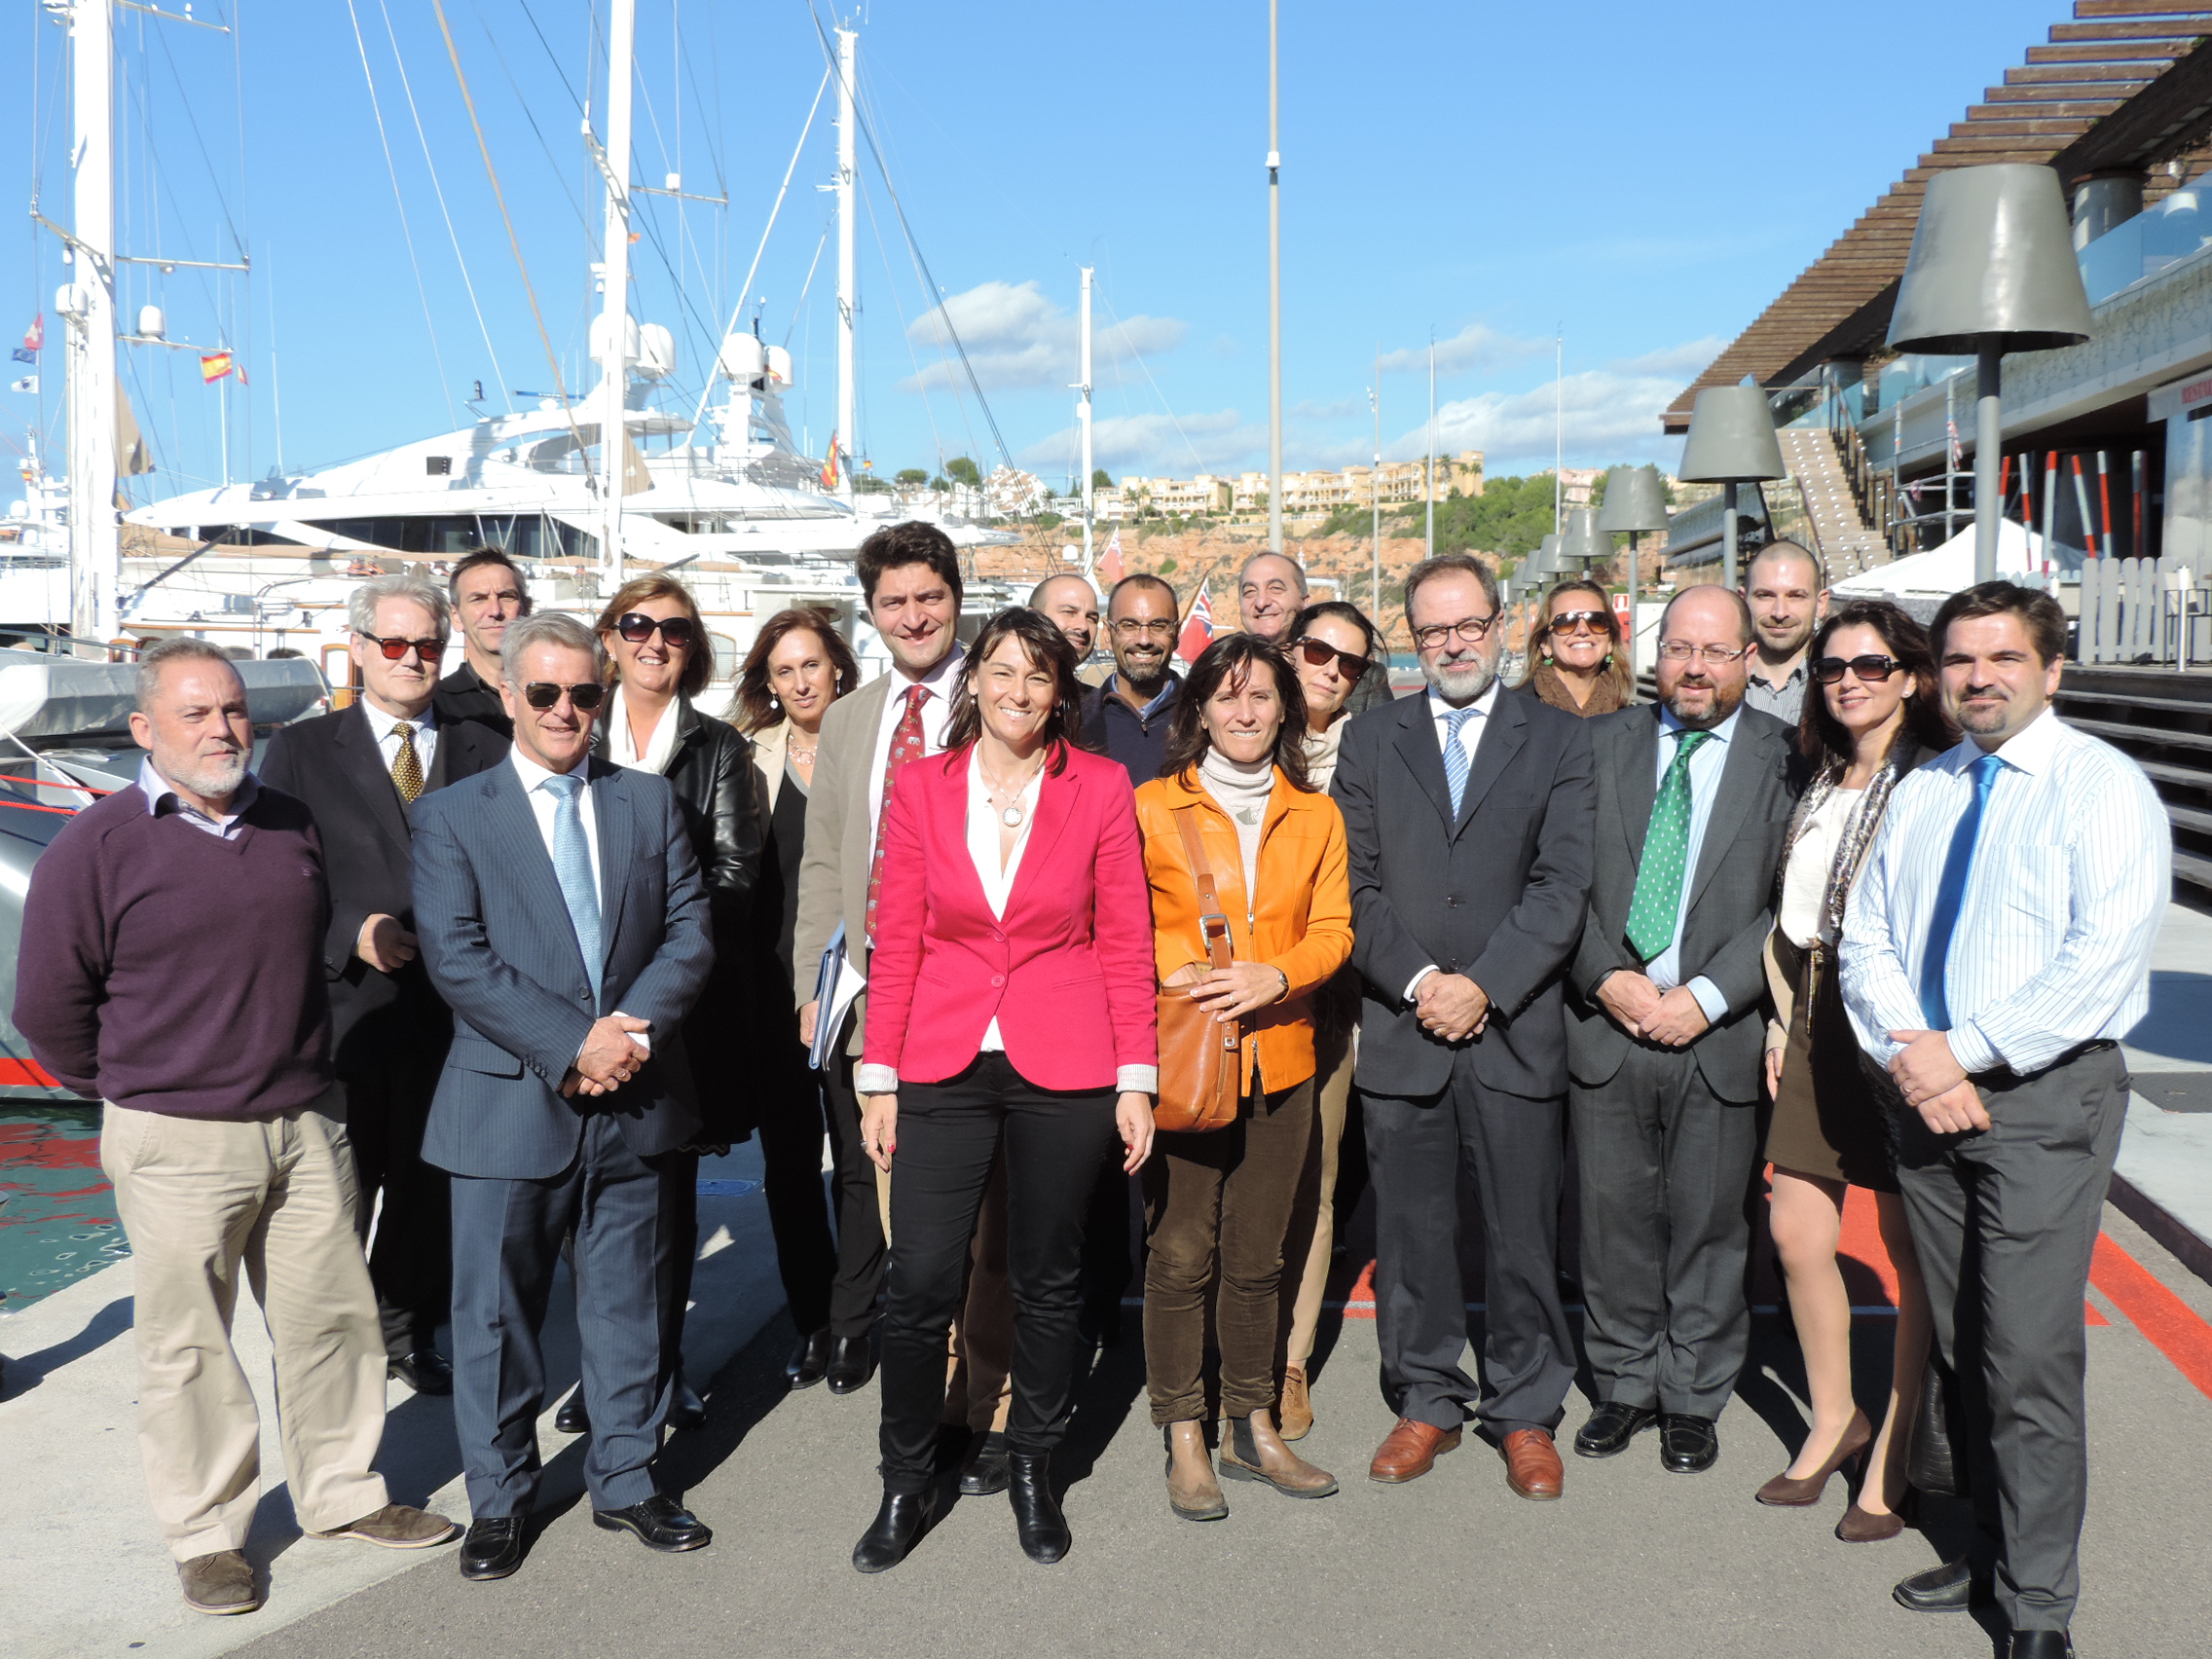 The APB holds a meeting of the Institutional Forum for Quality in the Public Sector at Port Adriano    